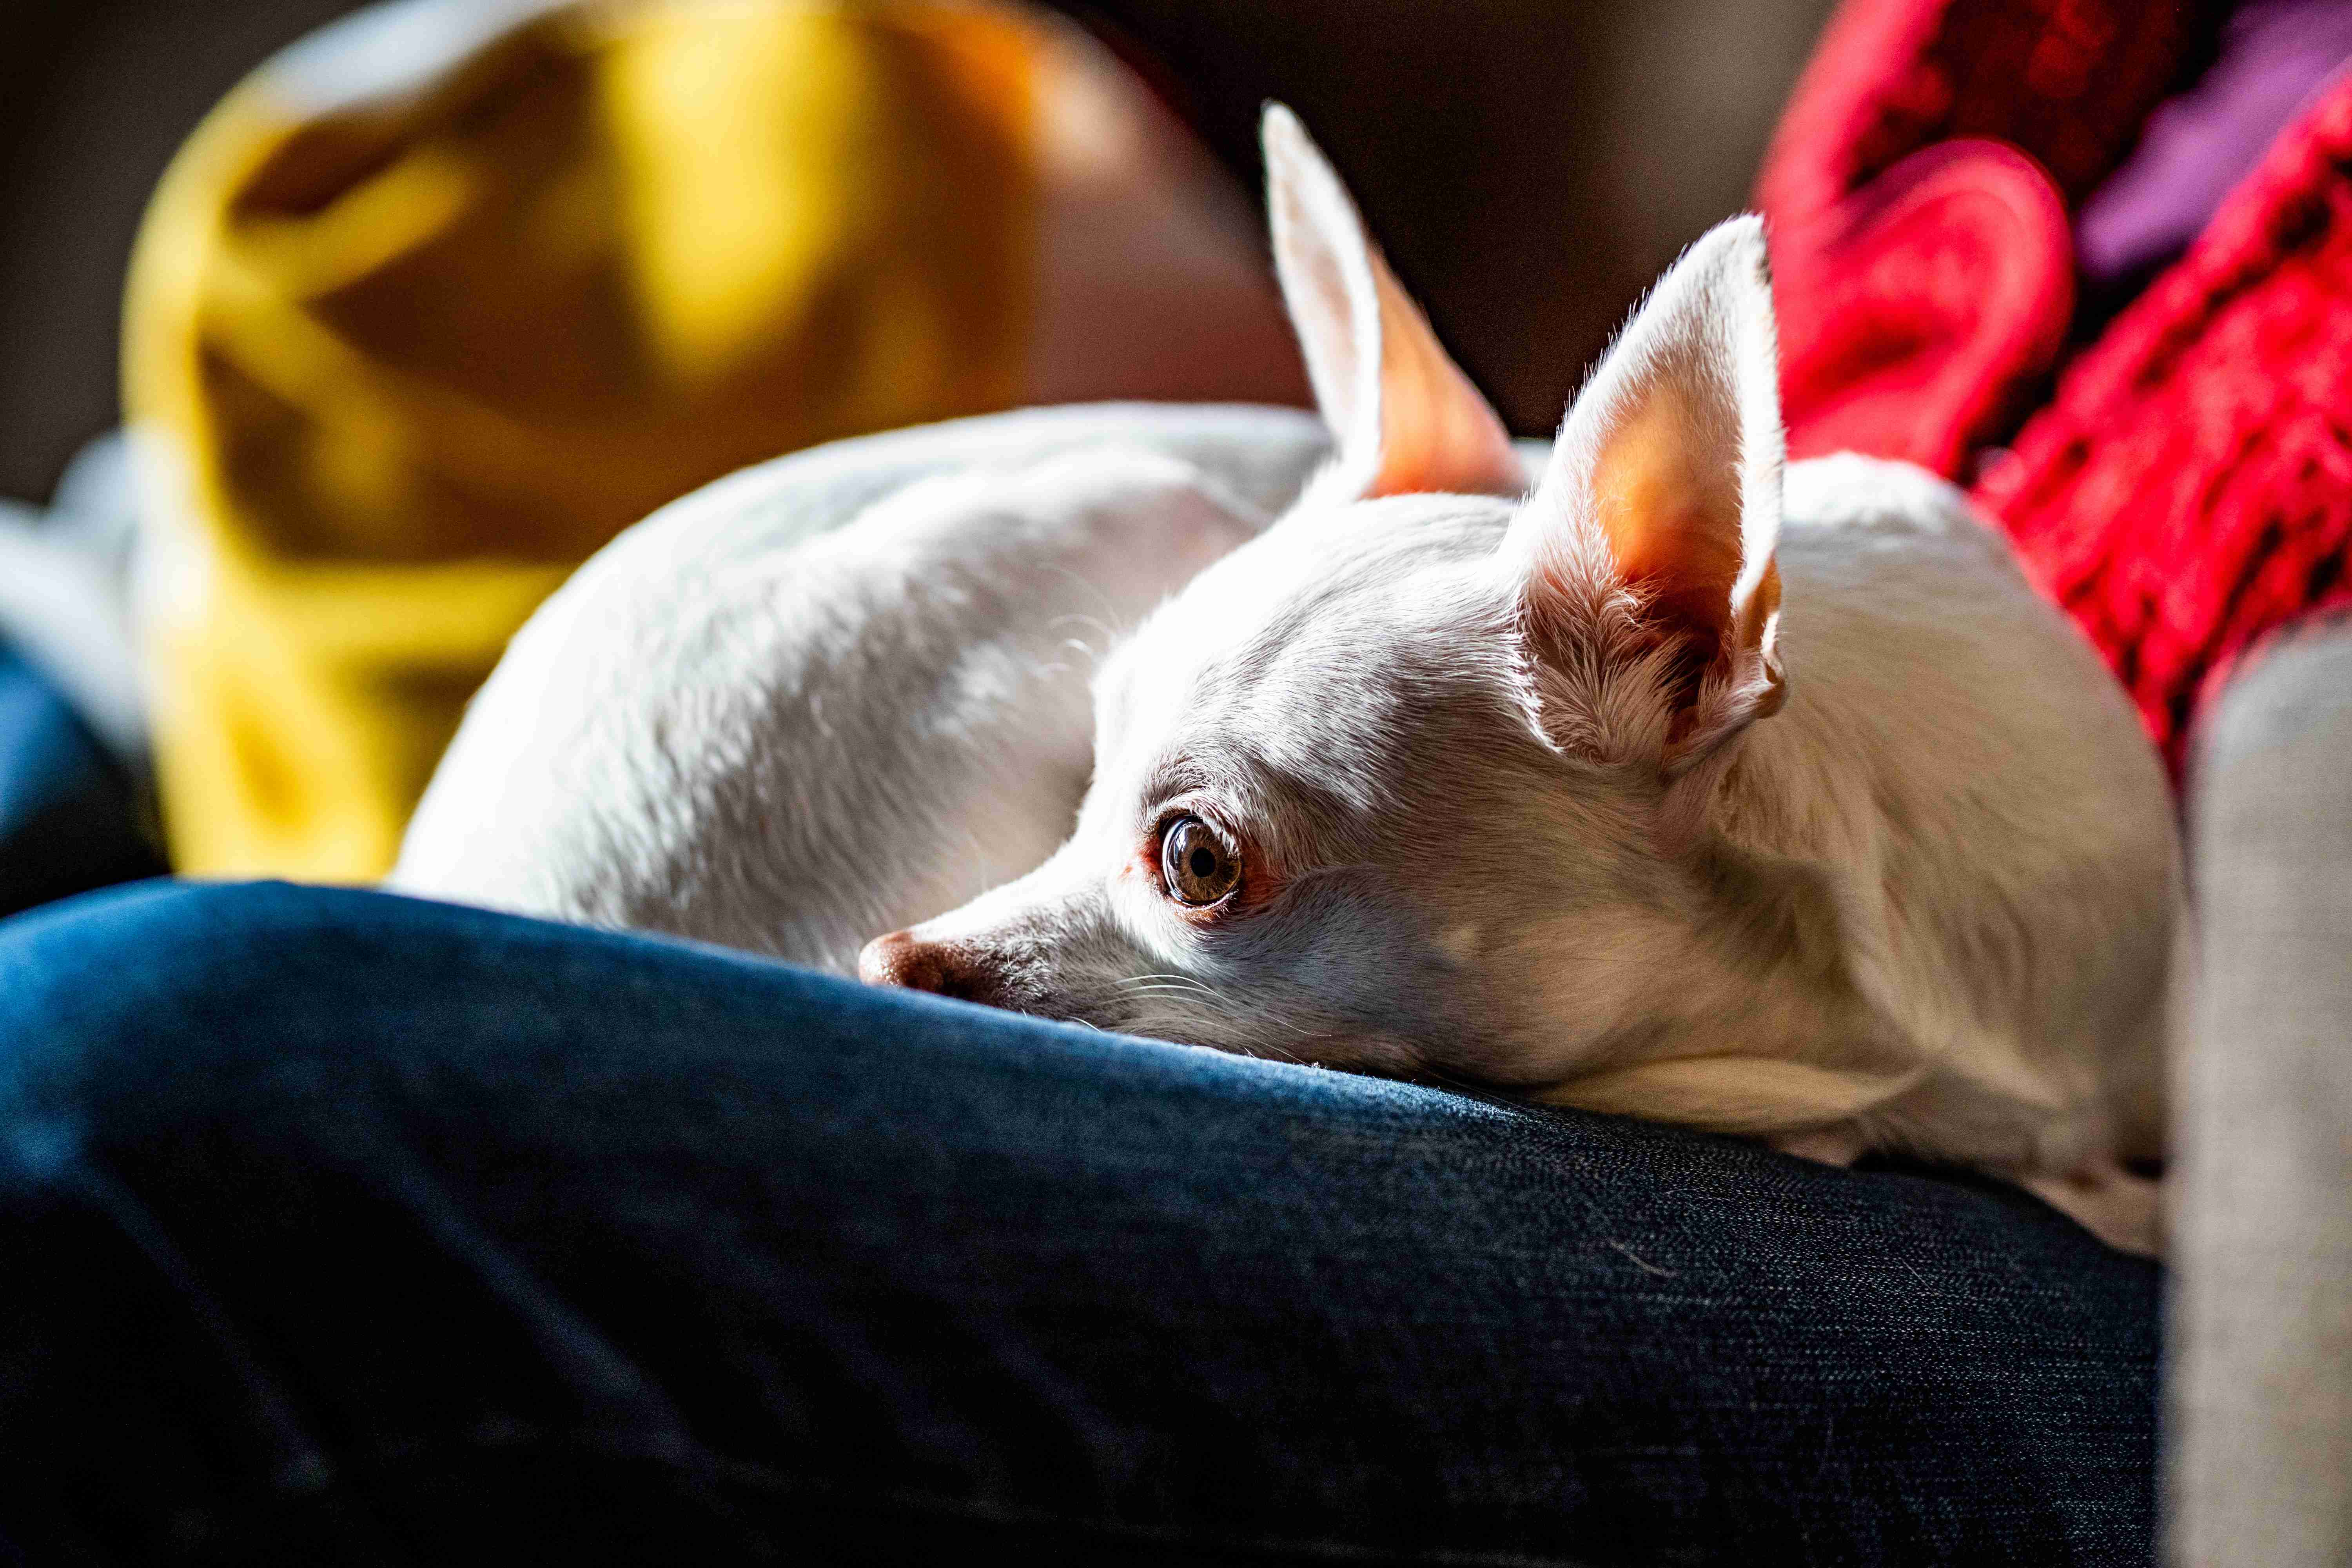 How can you tell if a Chihuahua is being aggressive out of fear or aggression?